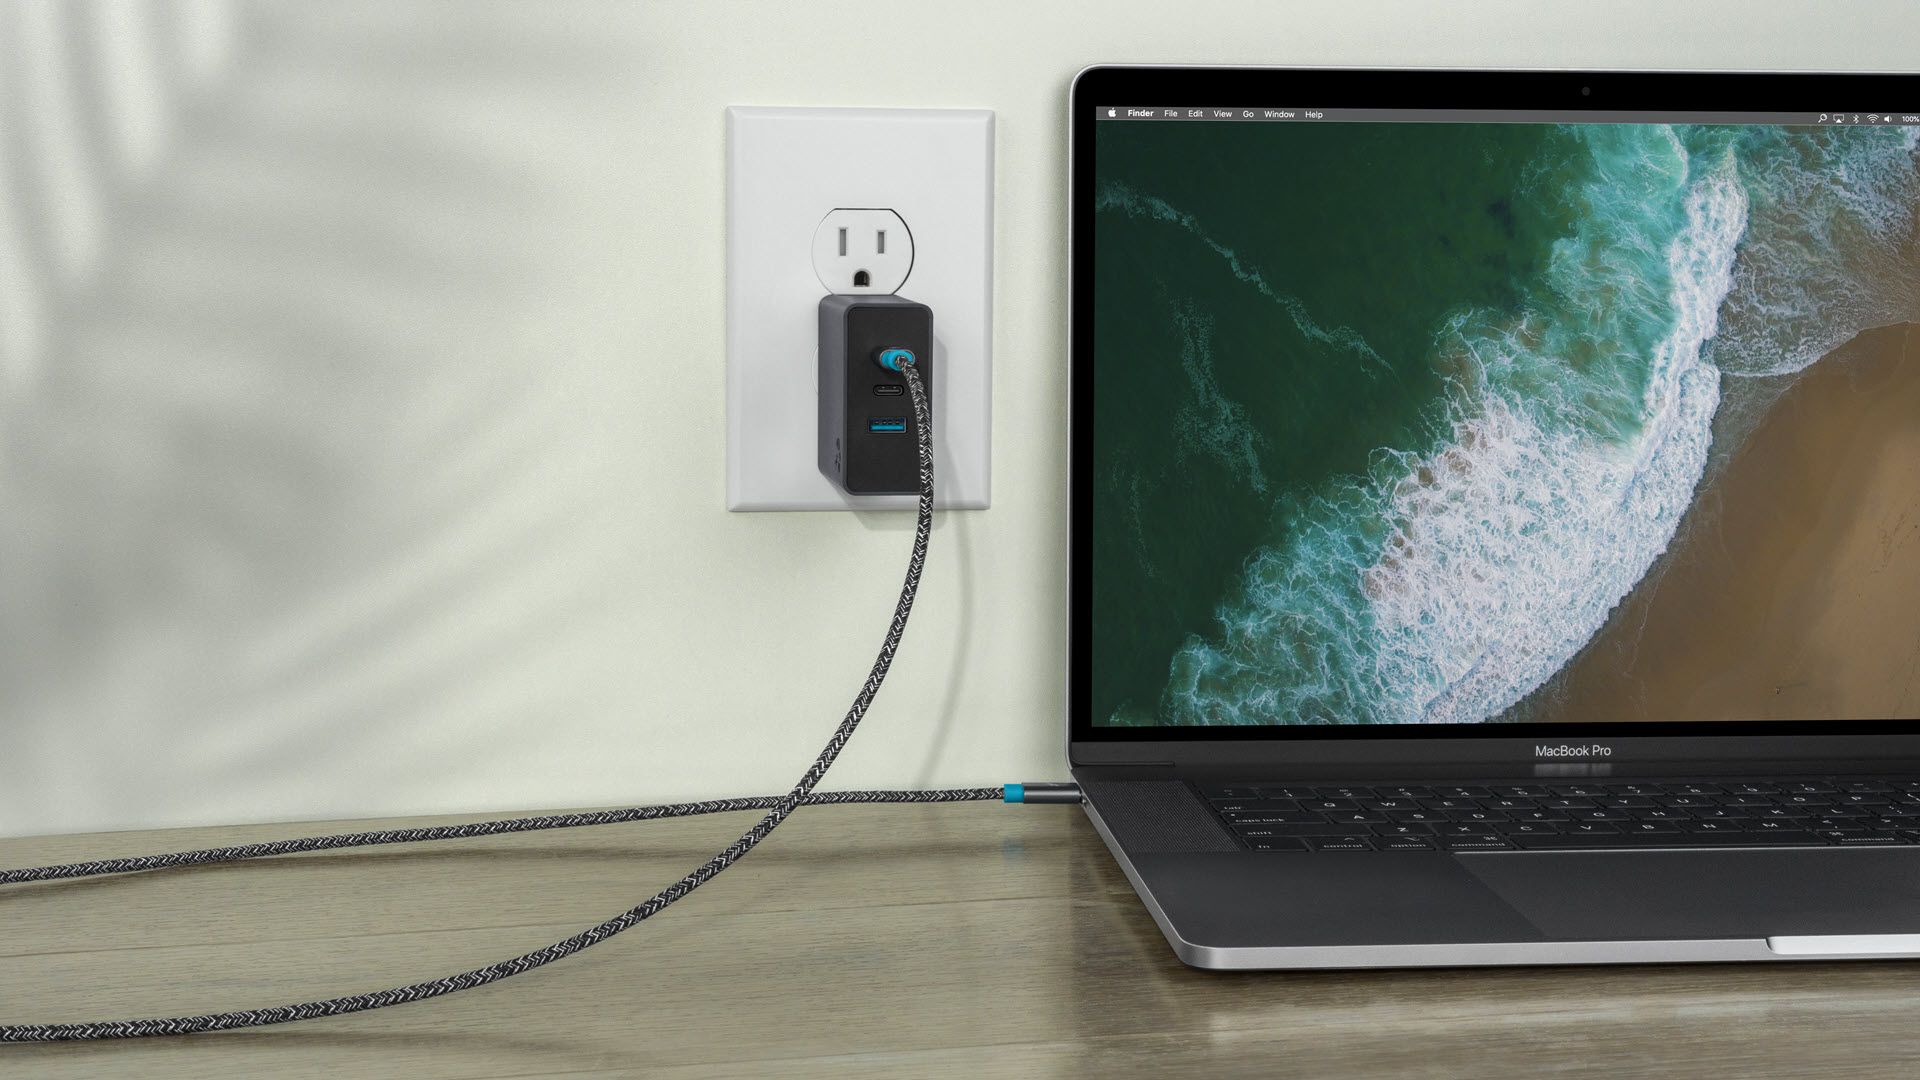 A Wally charger plugged into a Macbook Pro